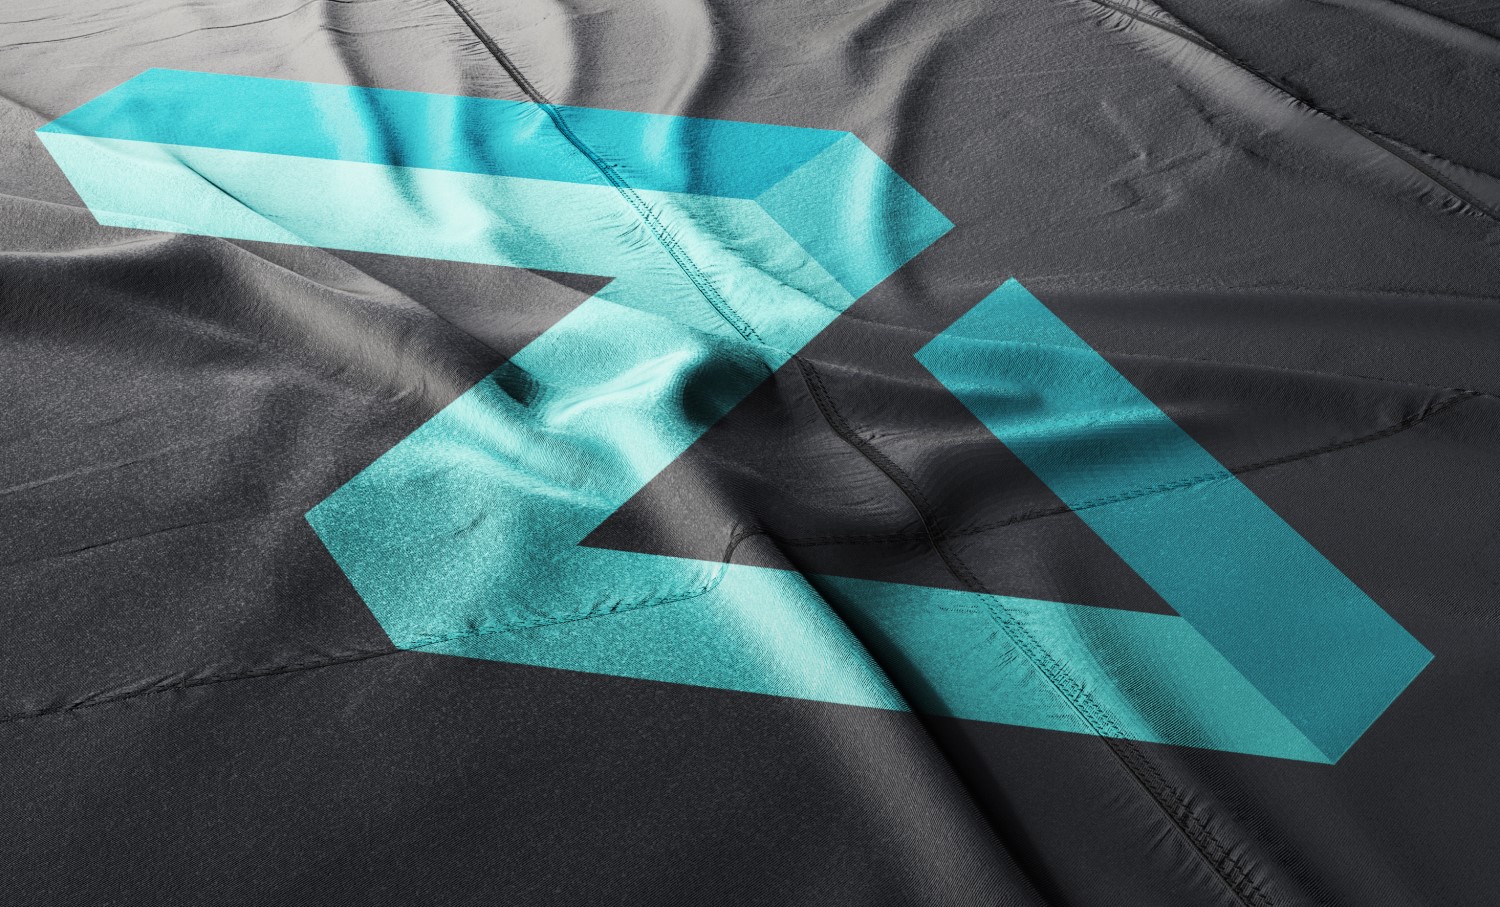 Zilliqa Passes ‘Milestone’ With Addition Of Smart Contracts To Its Blockchain